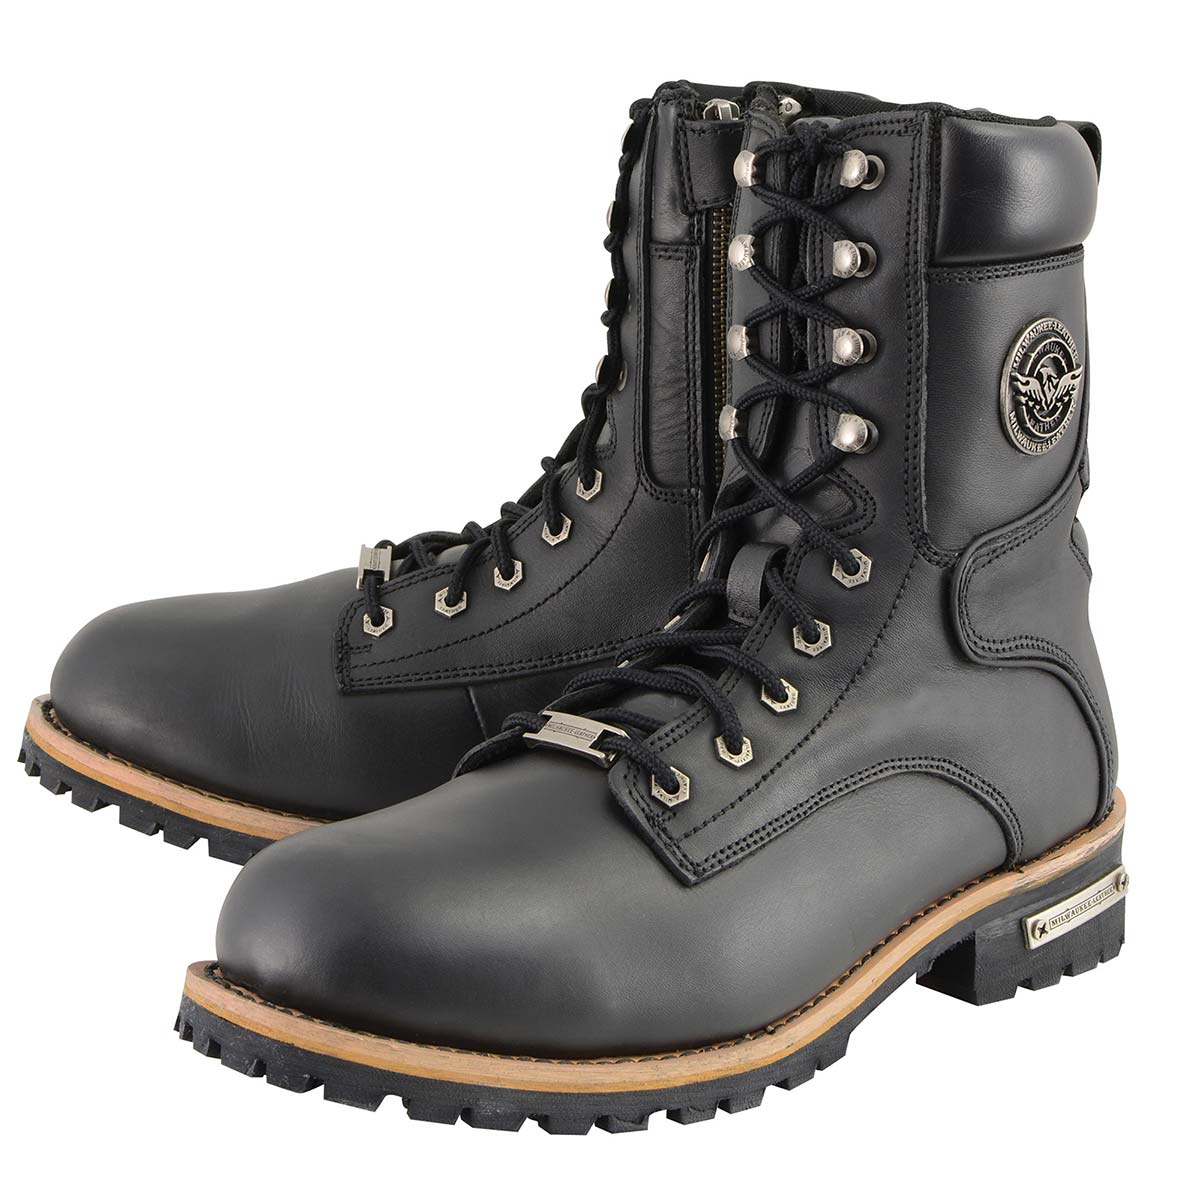 Men’s Classic Black Logger Lace-Up Boots with Side Zipper